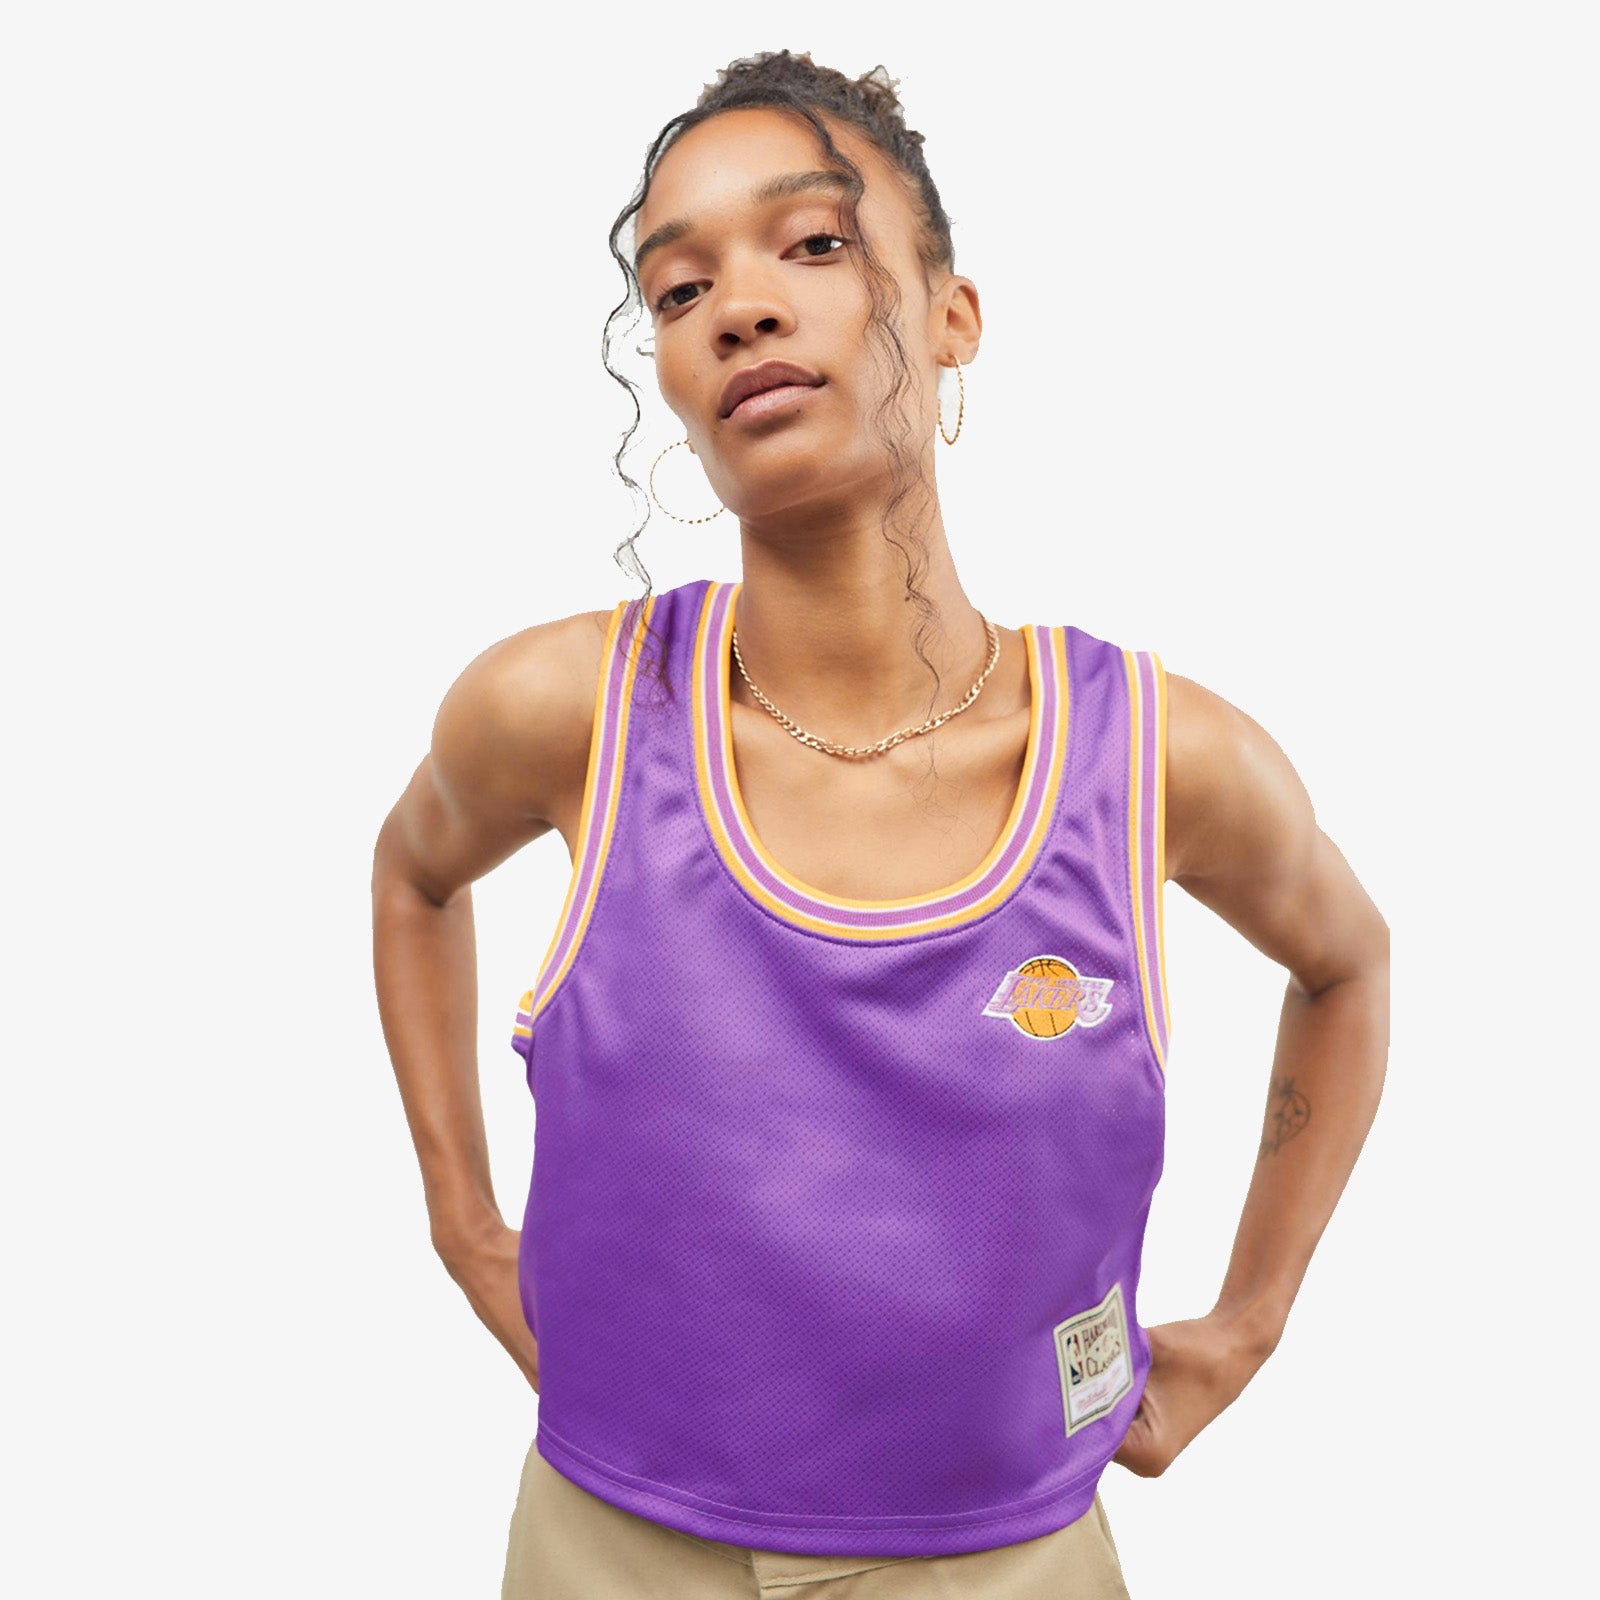 Los Angeles Lakers Women's Phoebe Military SS Tee – Lakers Store